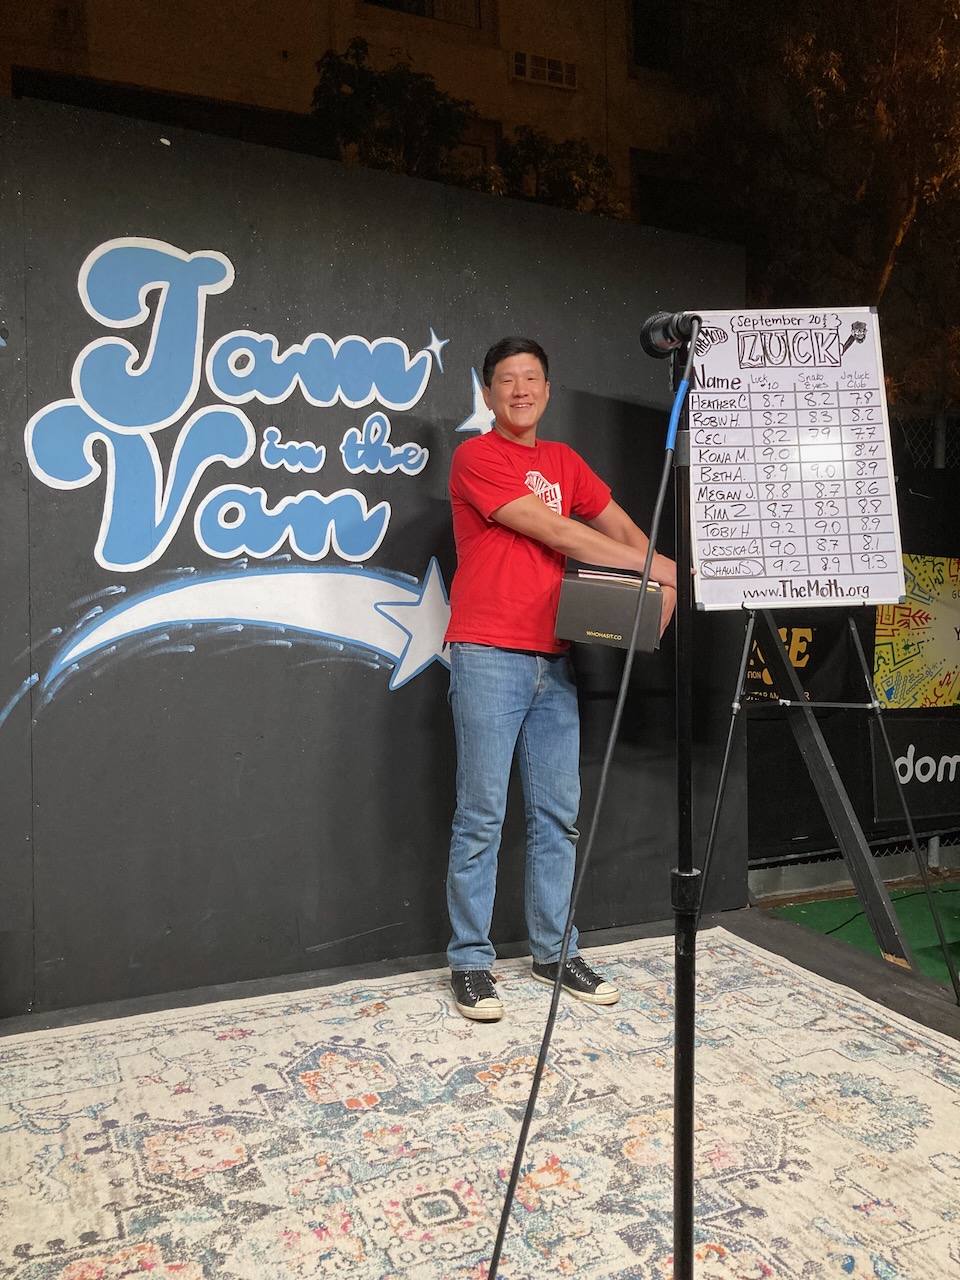 Me standing on a stage, pointing at a scoreboard with my name circled with the highest score